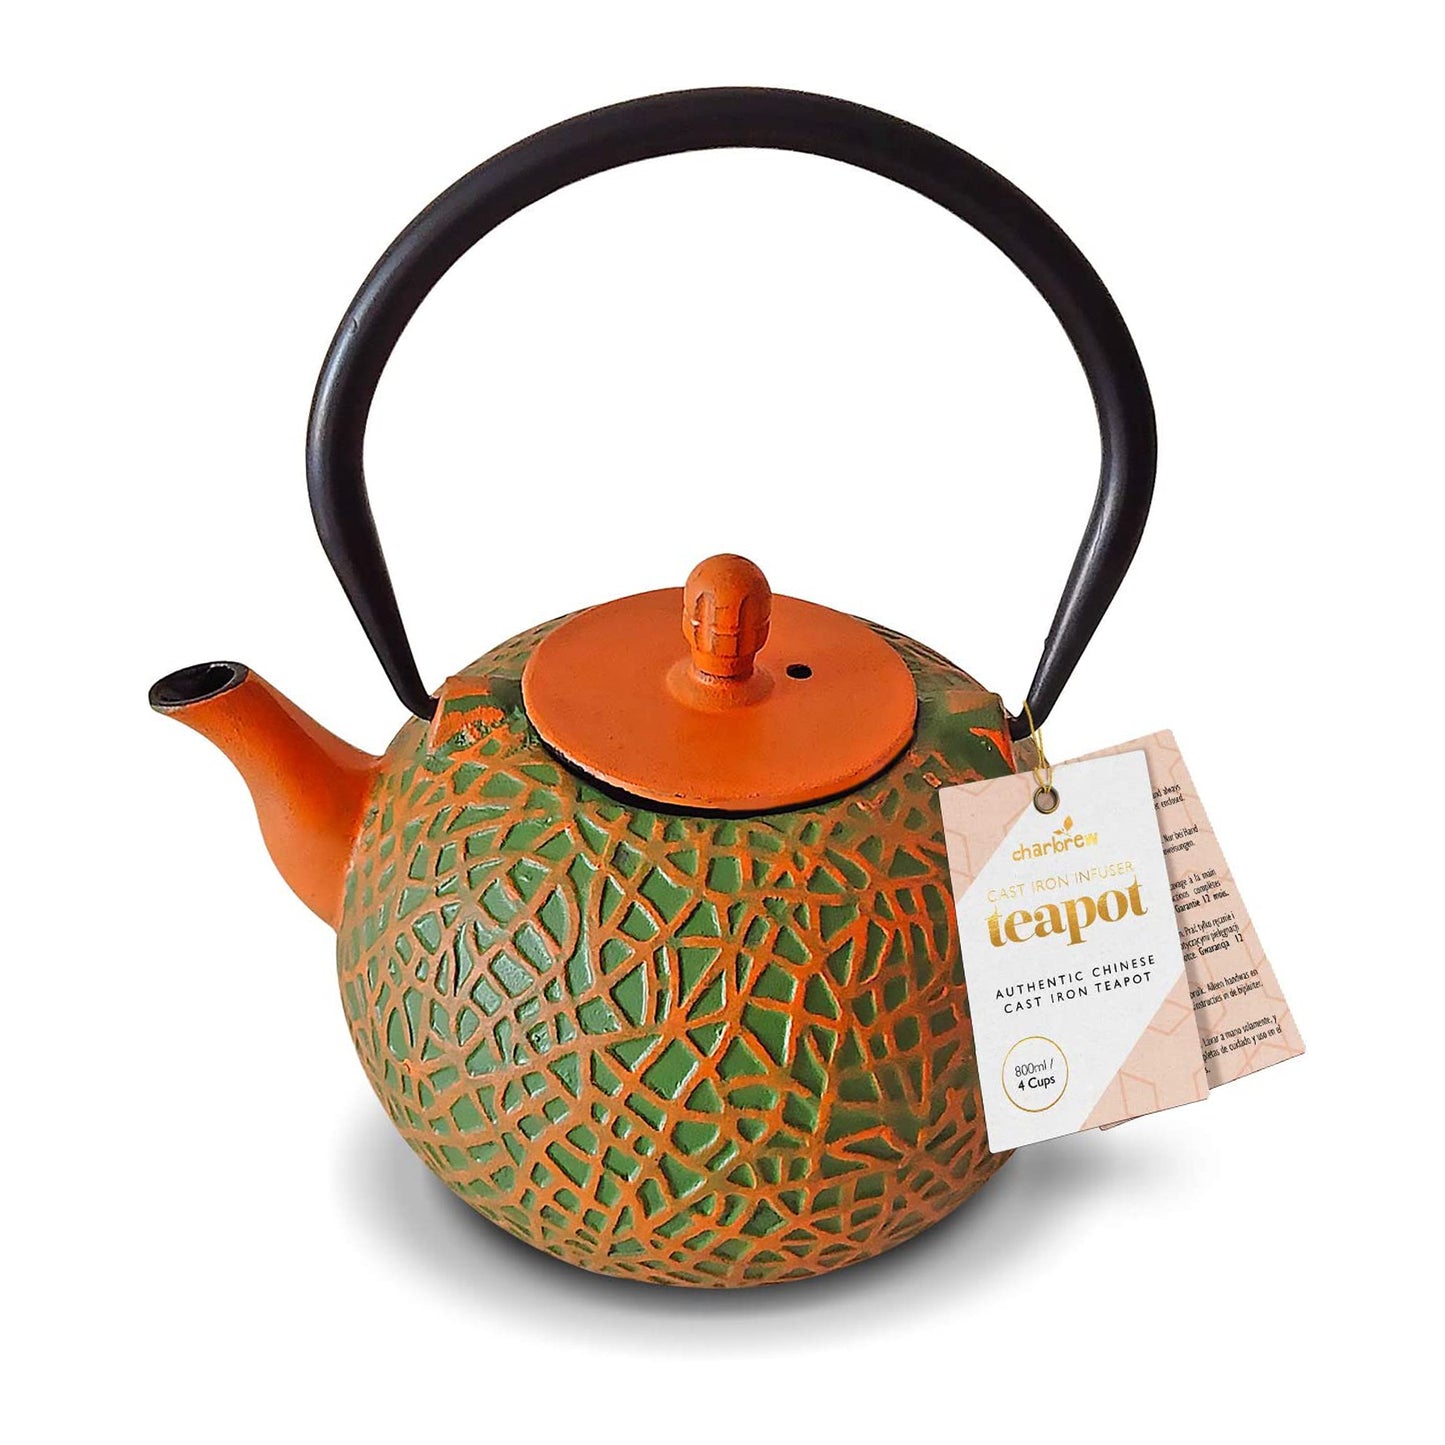 Traditional cast iron olive and orange teapot